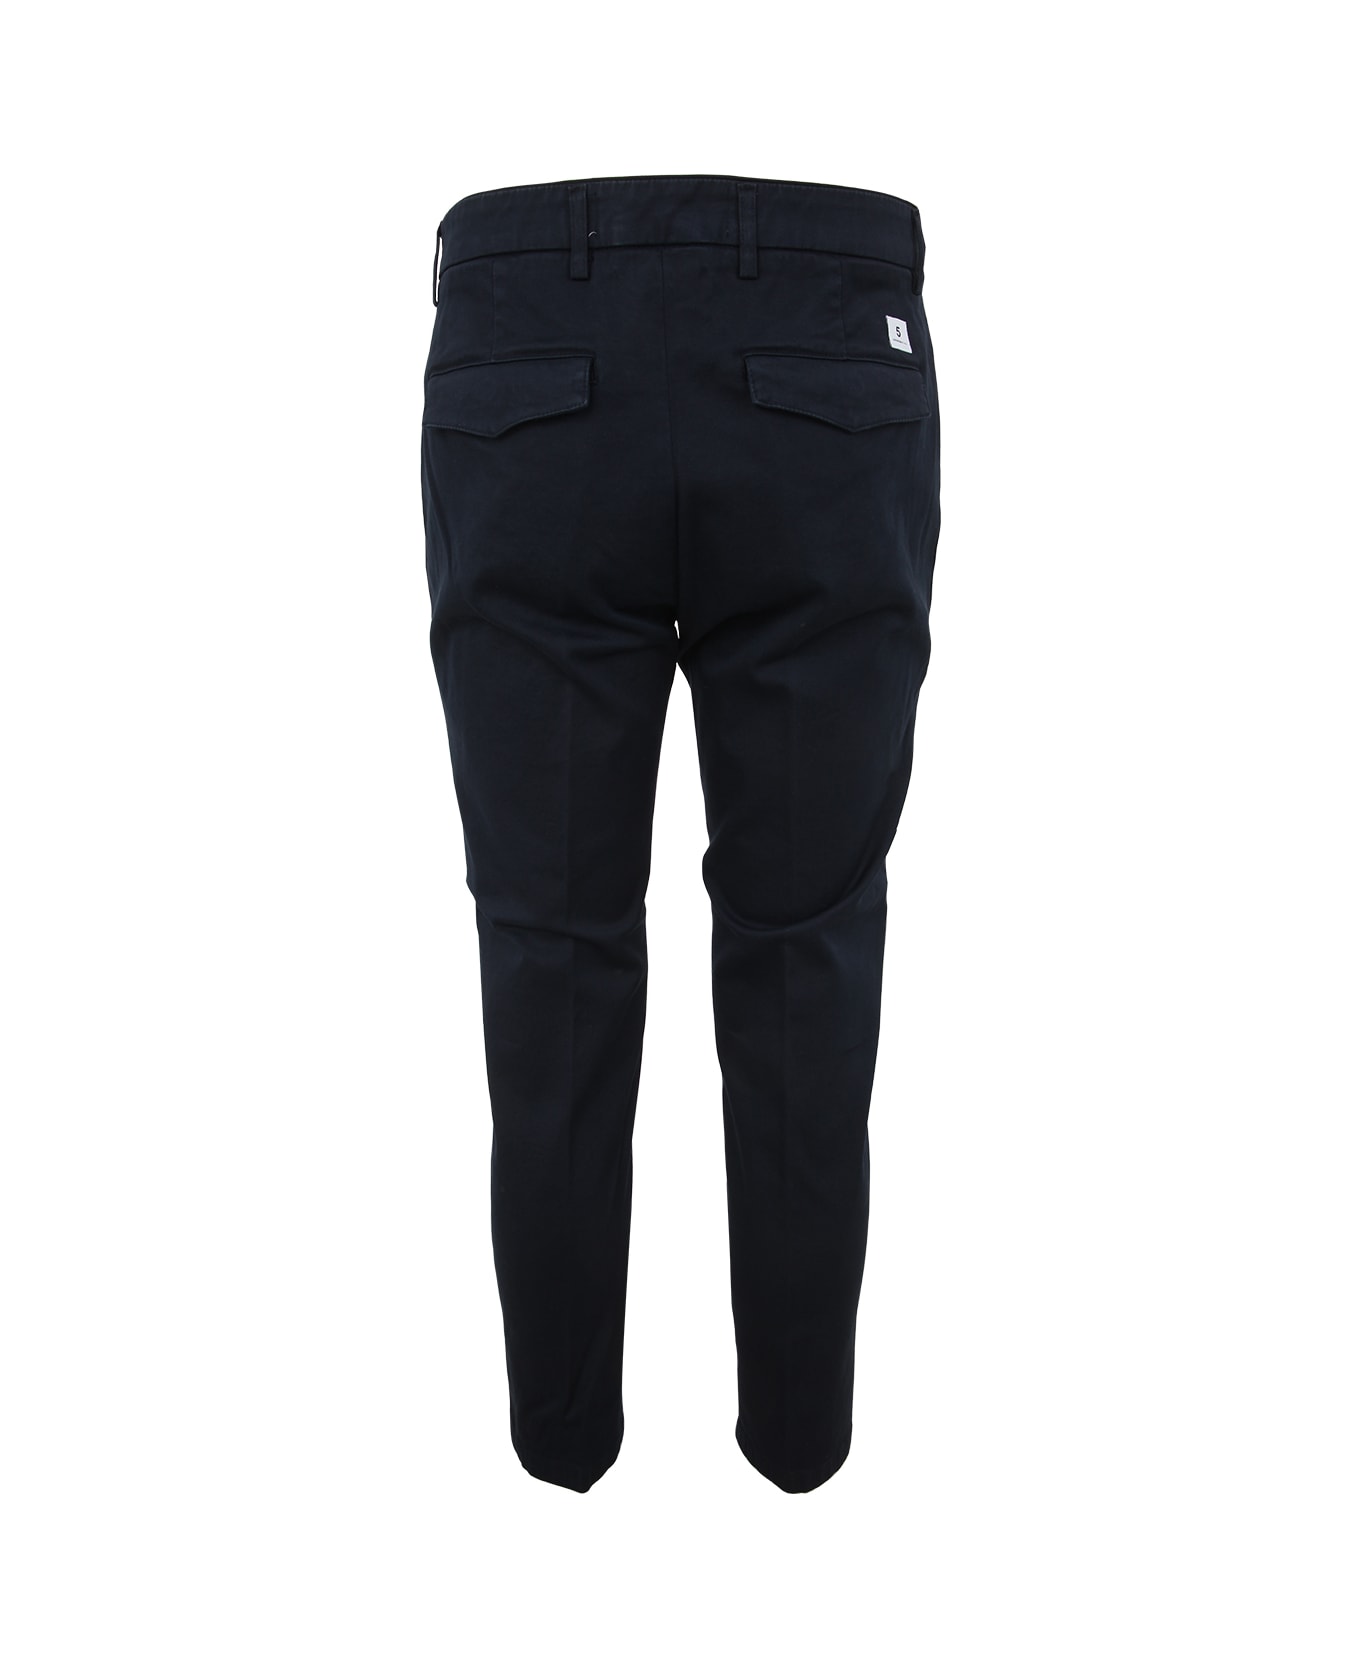 Department Five Prince Chinos Crop Trousers - Navy